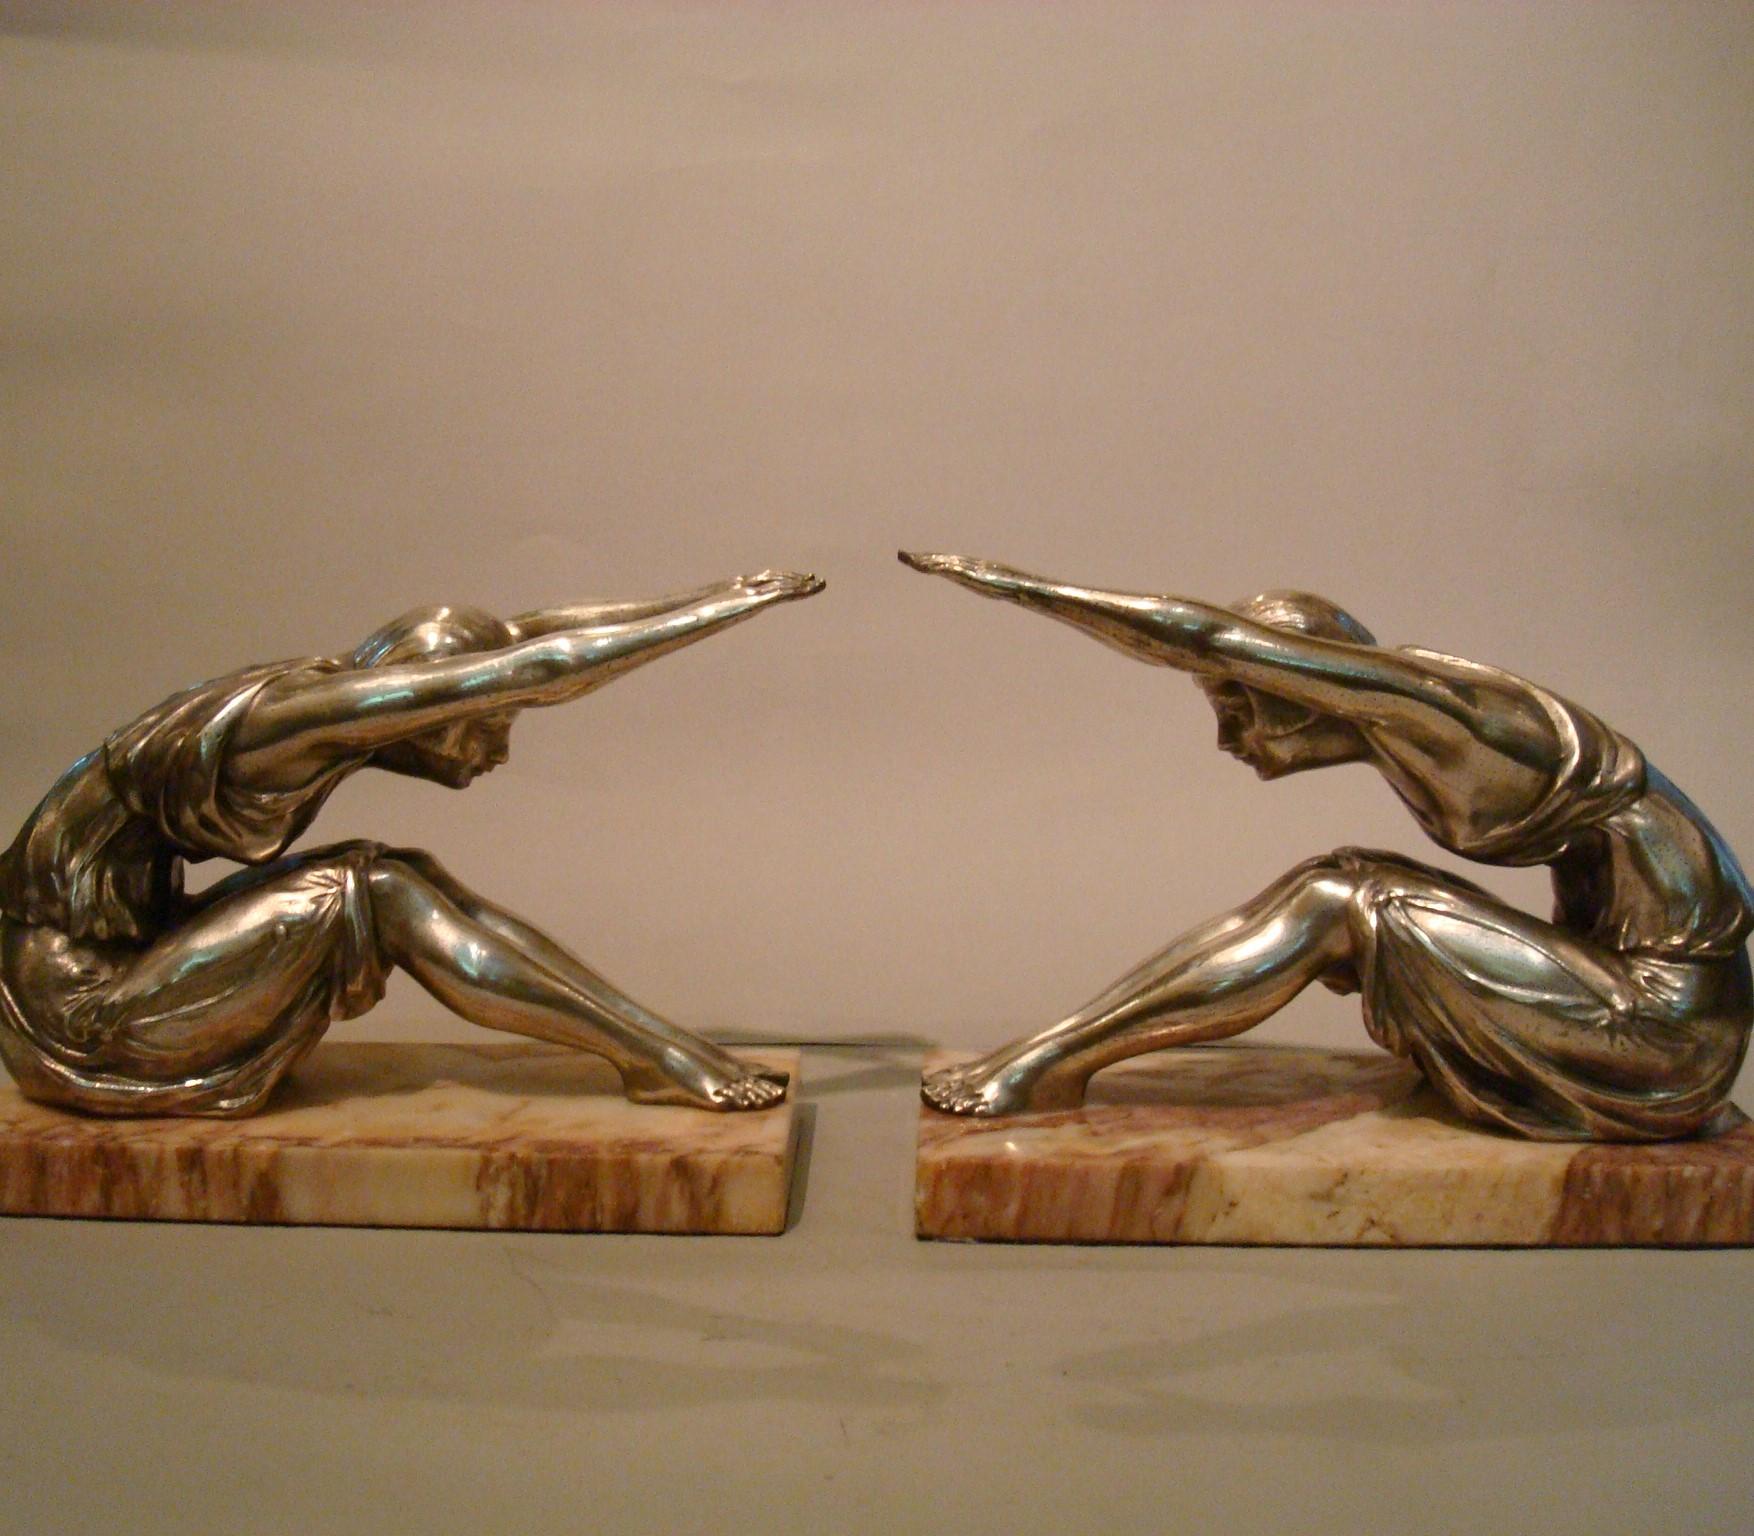 Art Deco female figure - Sculpture bookends, France, 1920s.
Pair of female bookends in silver plated finish, great pose in the Art Deco style, made in France.